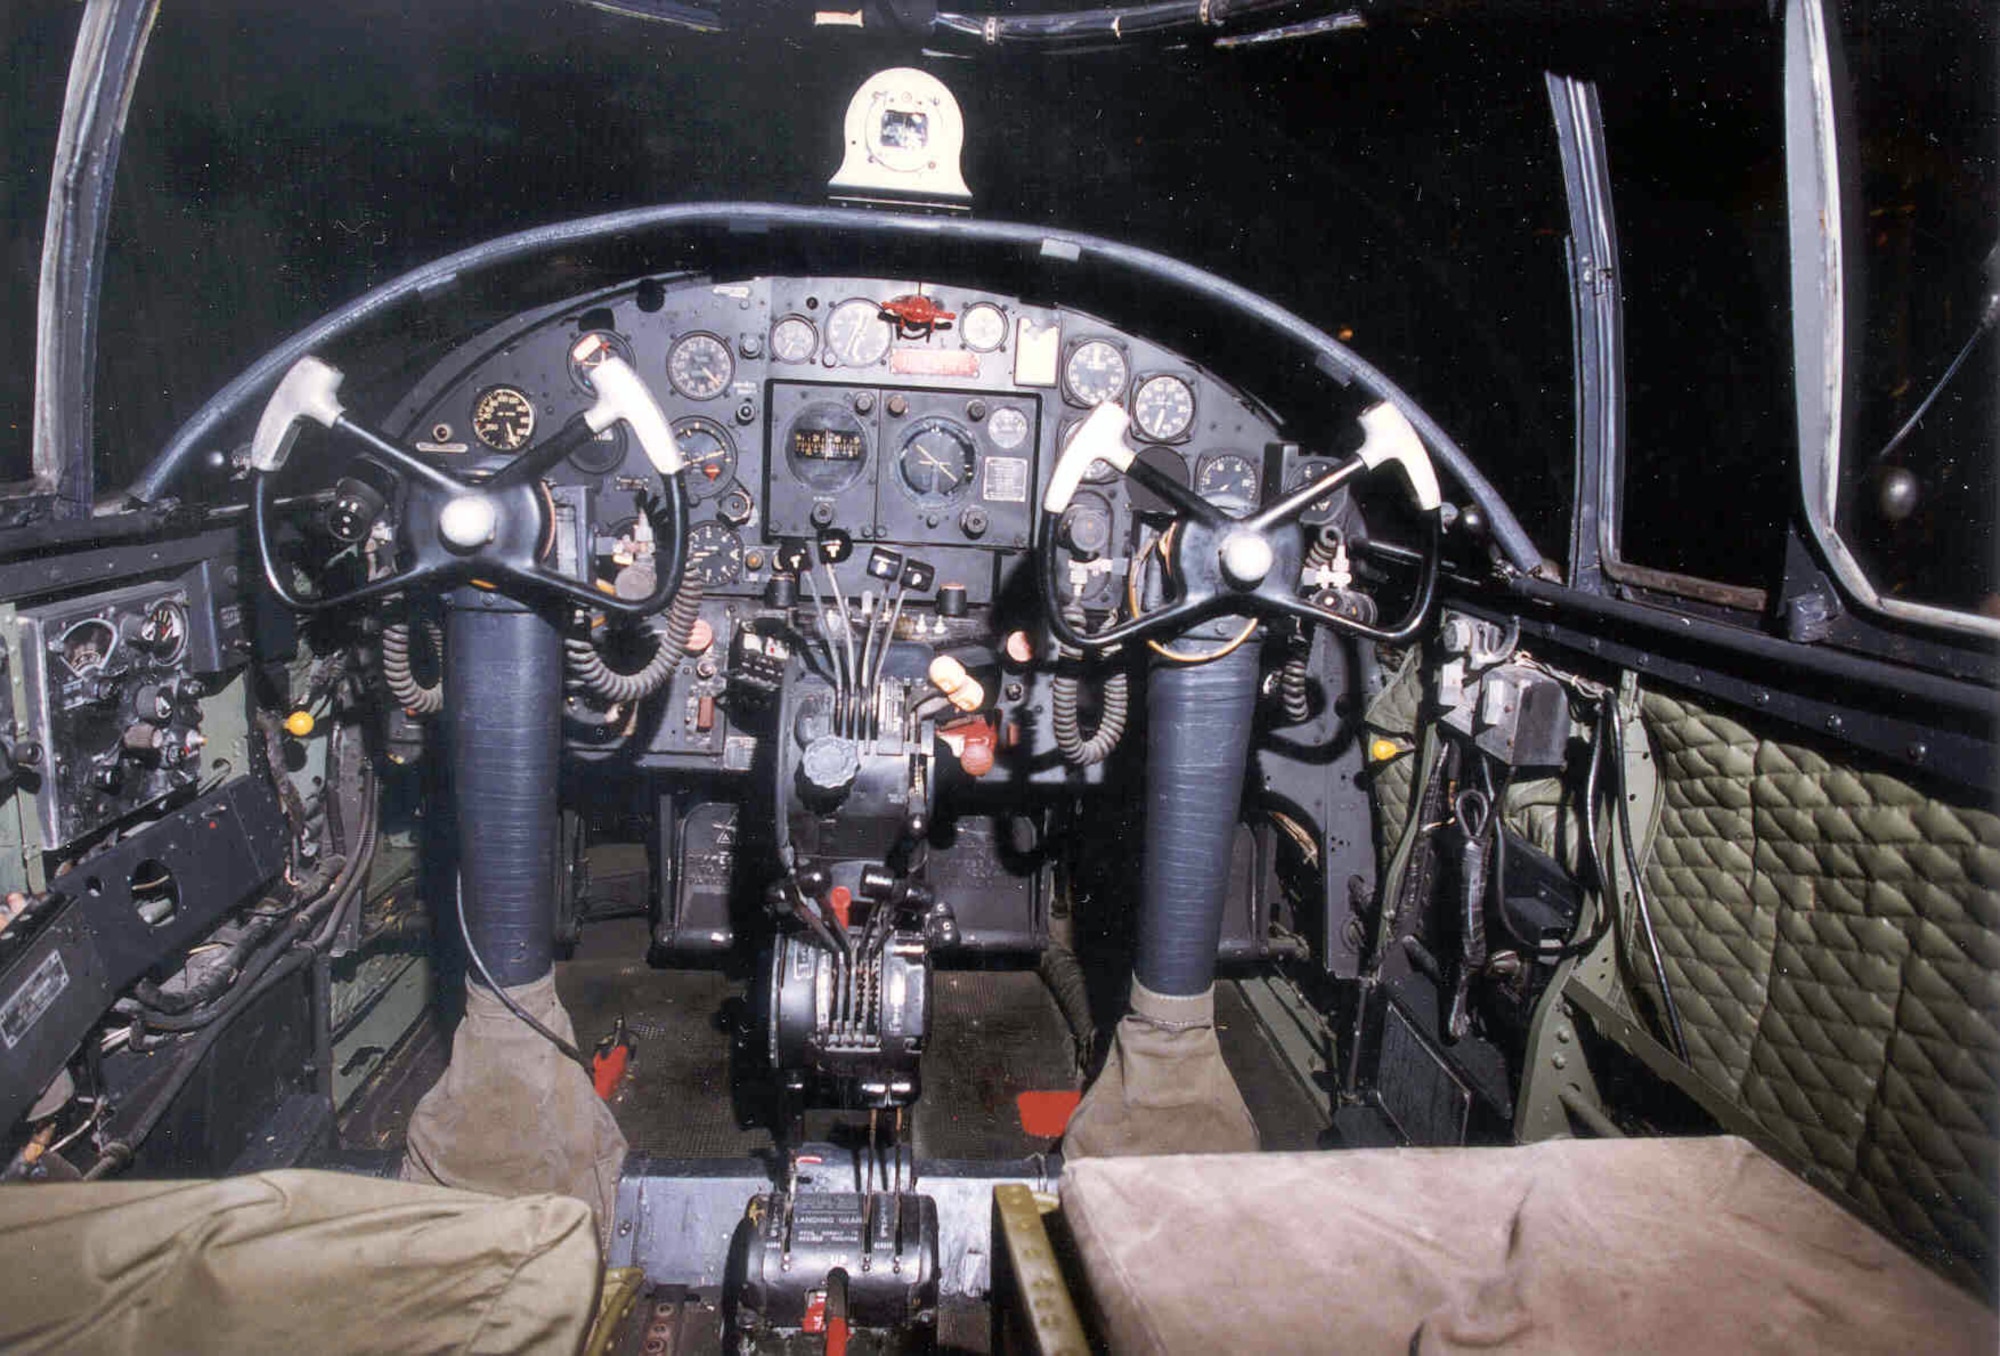 DAYTON, Ohio - North American B-25B Mitchell cockpit at the National Museum of the U.S. Air Force. (U.S. Air Force photo)